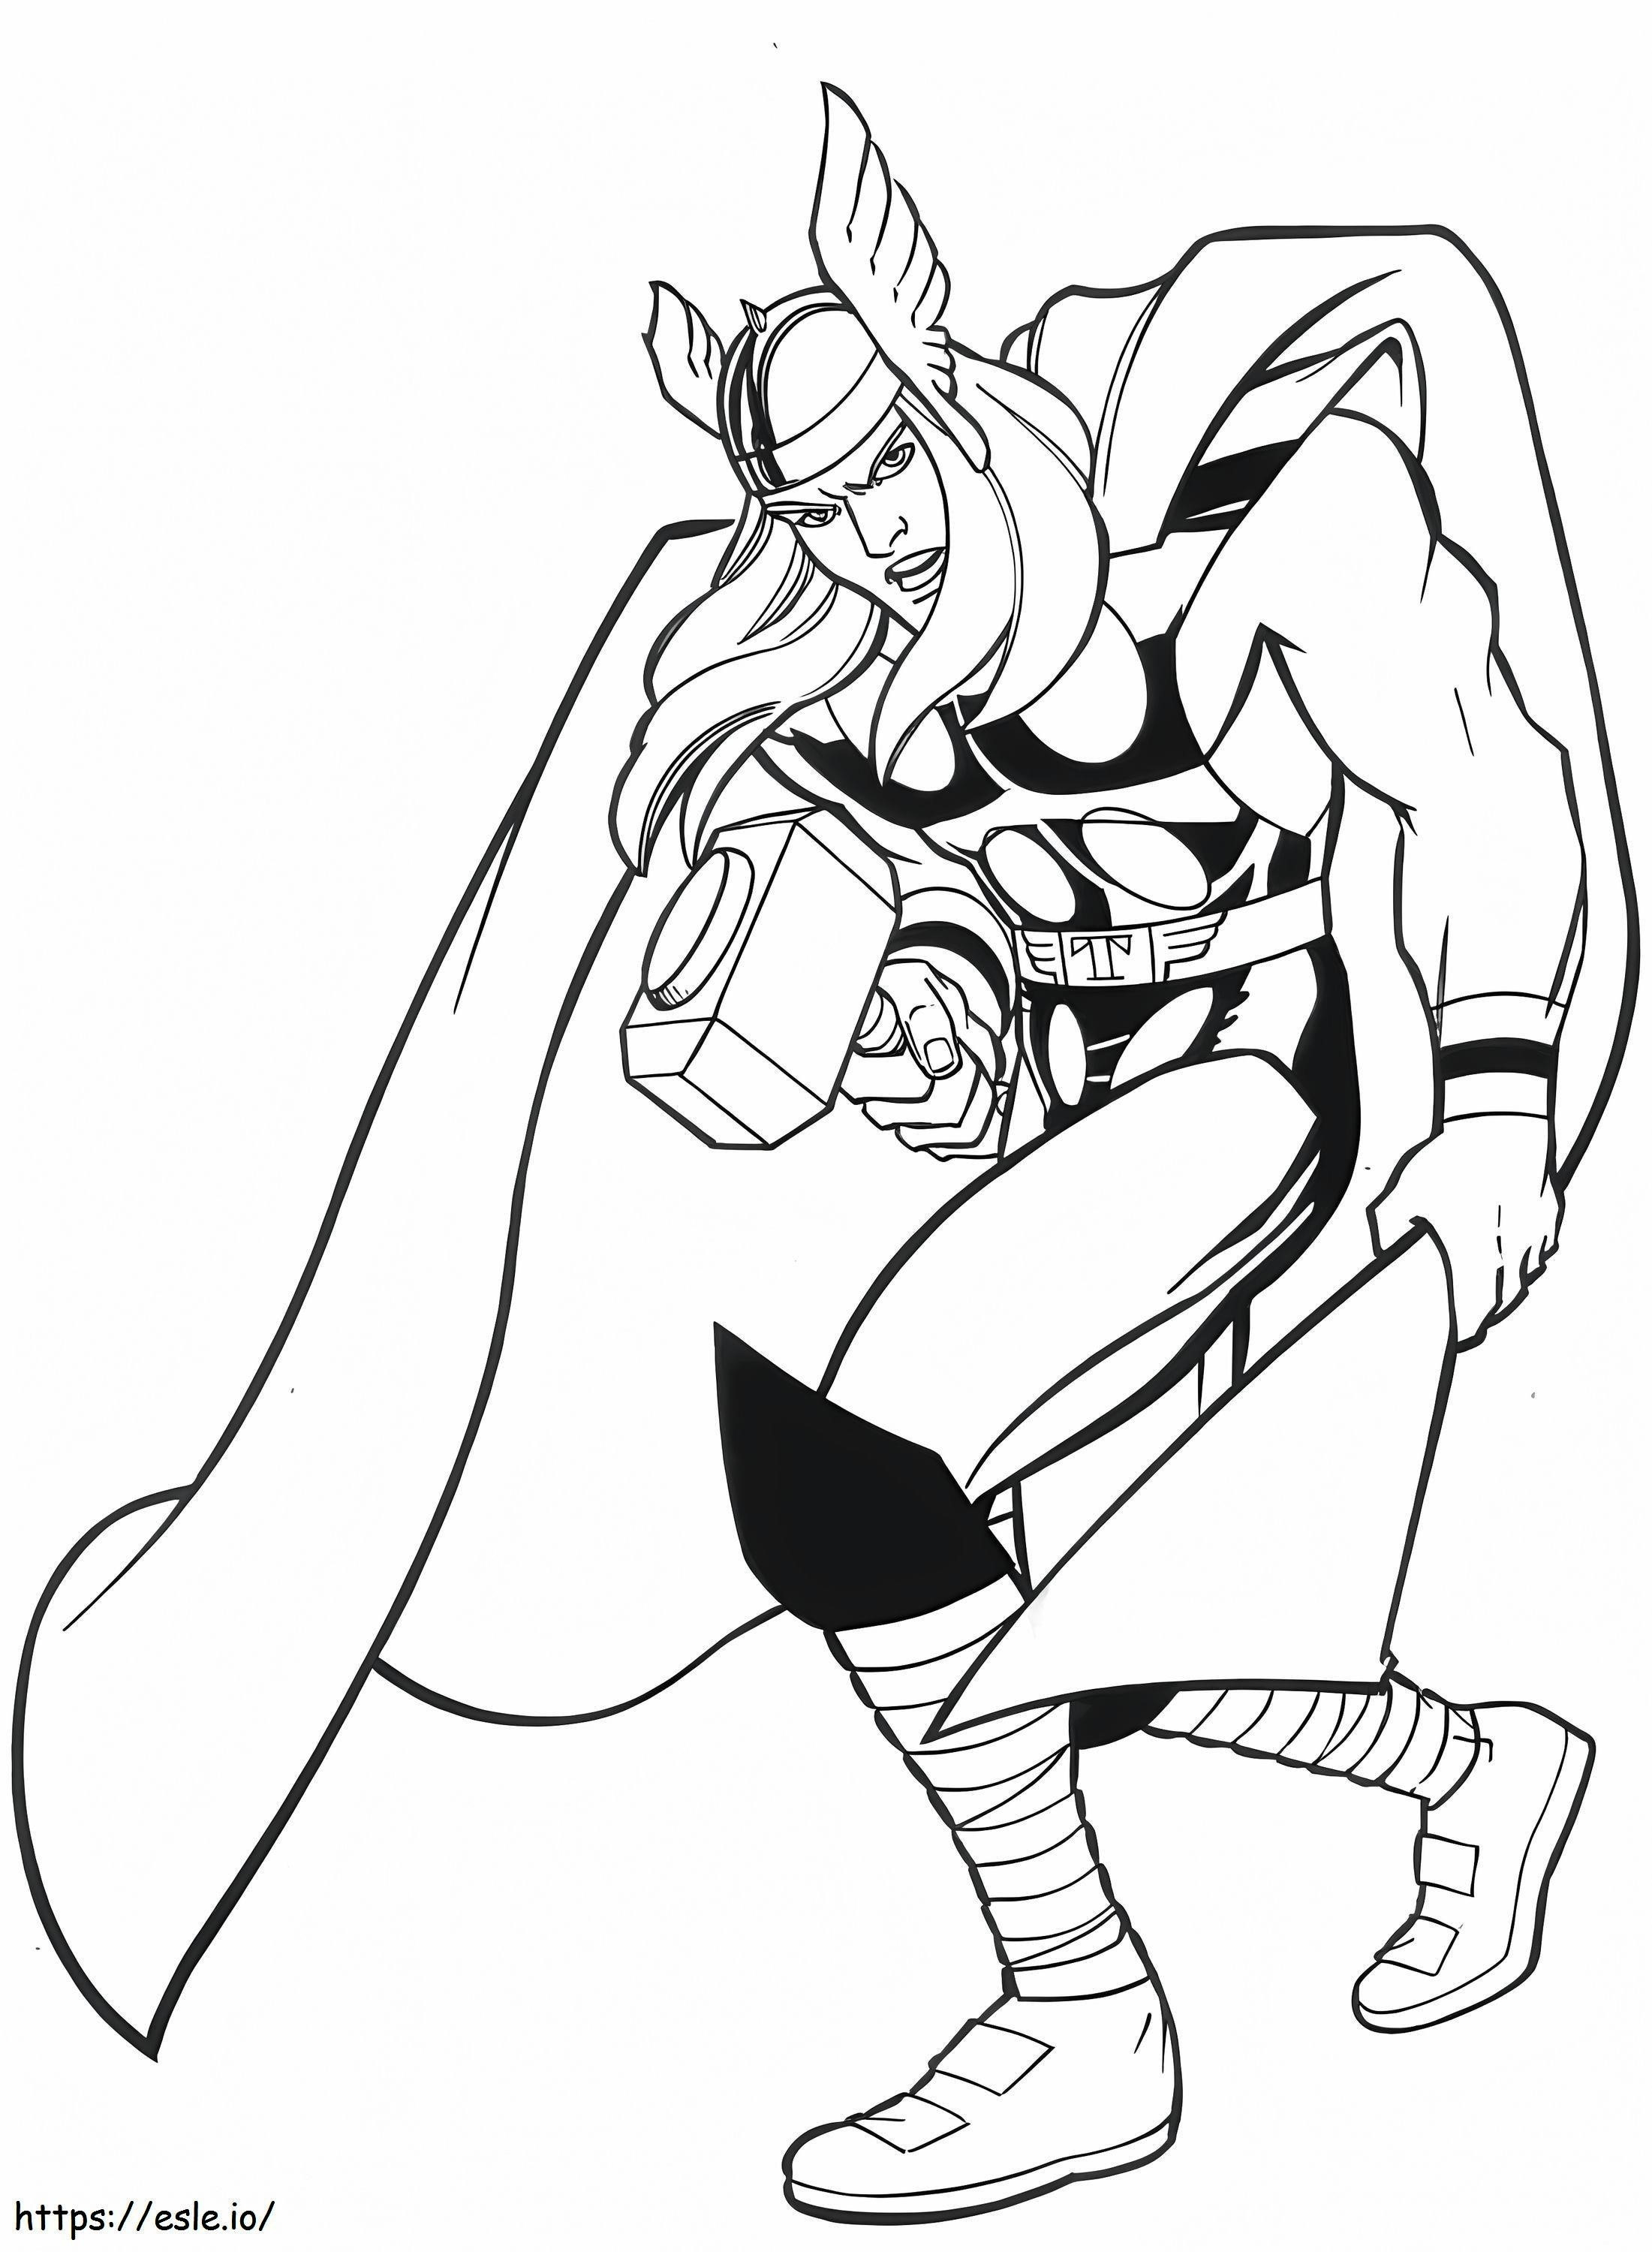 To Worship Thor coloring page